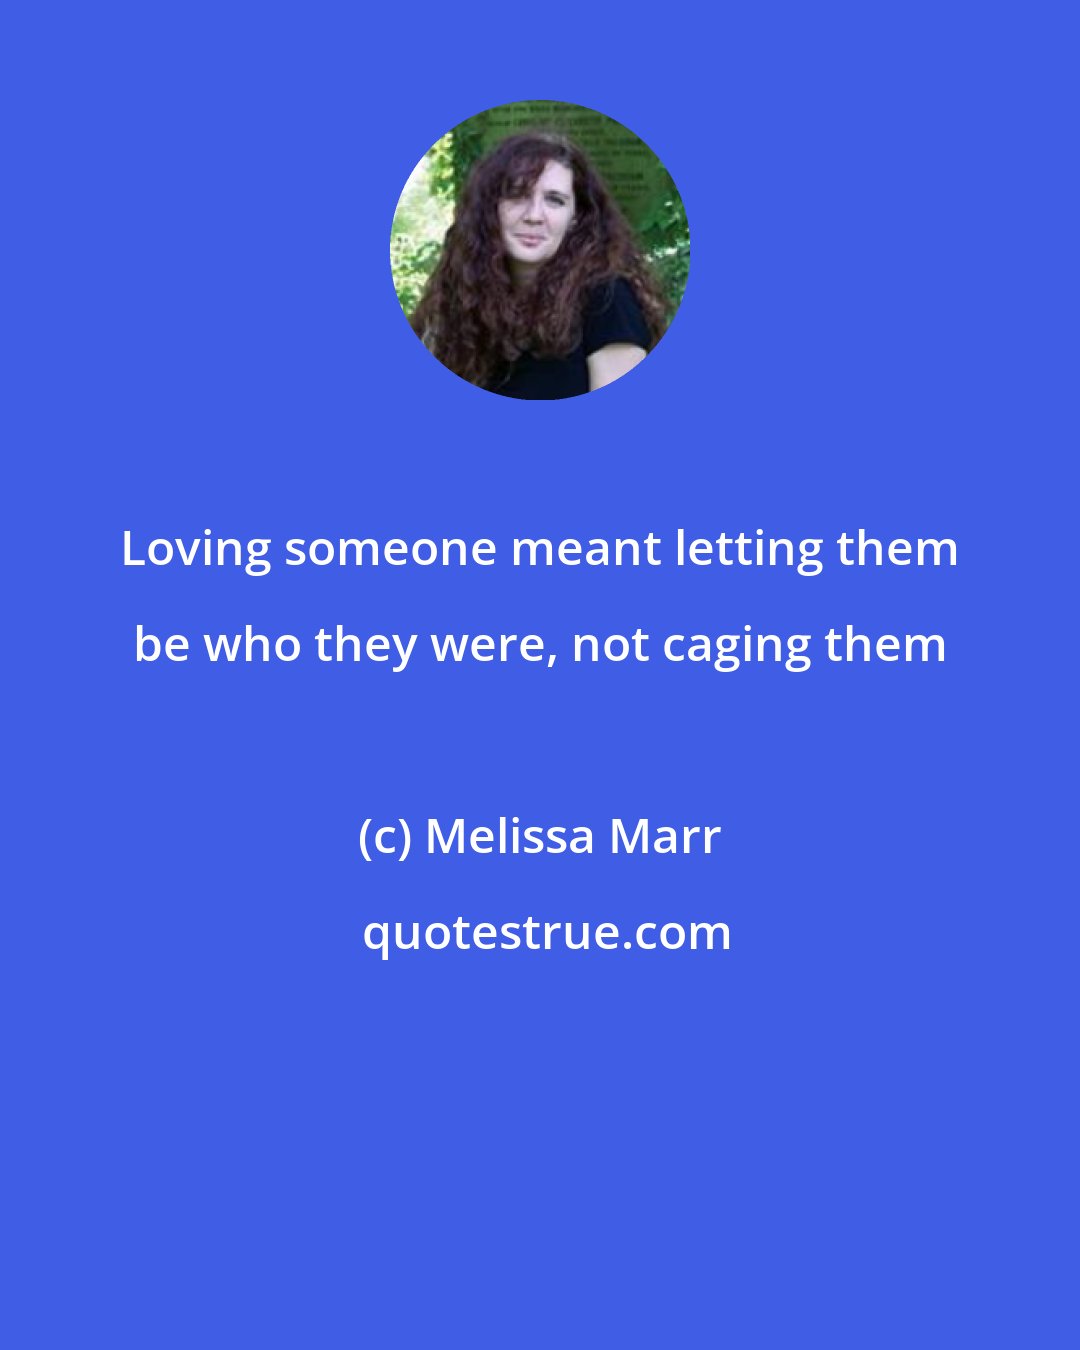 Melissa Marr: Loving someone meant letting them be who they were, not caging them